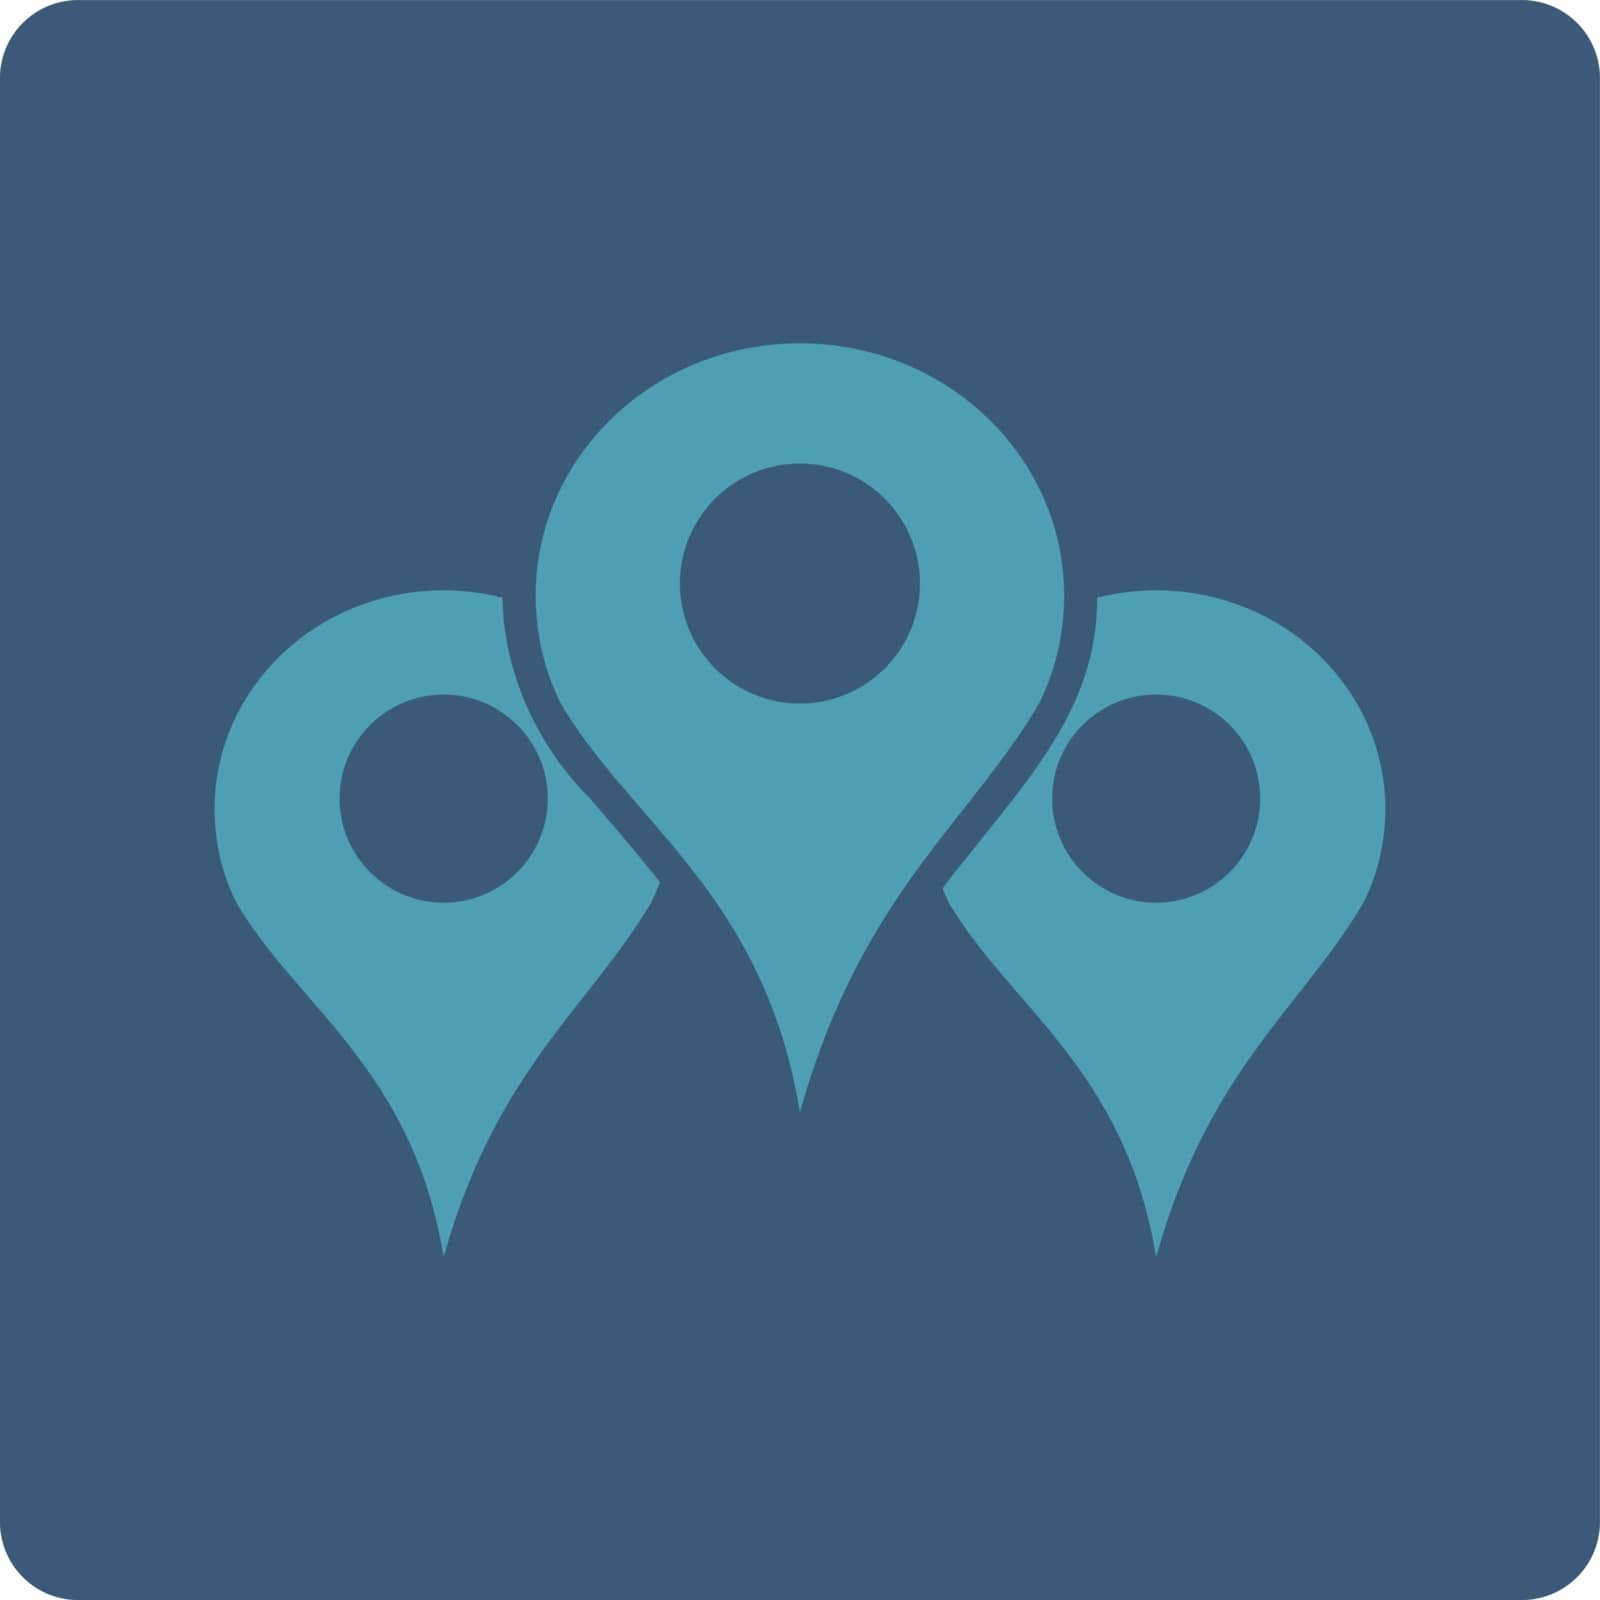 Locations vector icon. This flat rounded square button uses cyan and blue colors and isolated on a white background.